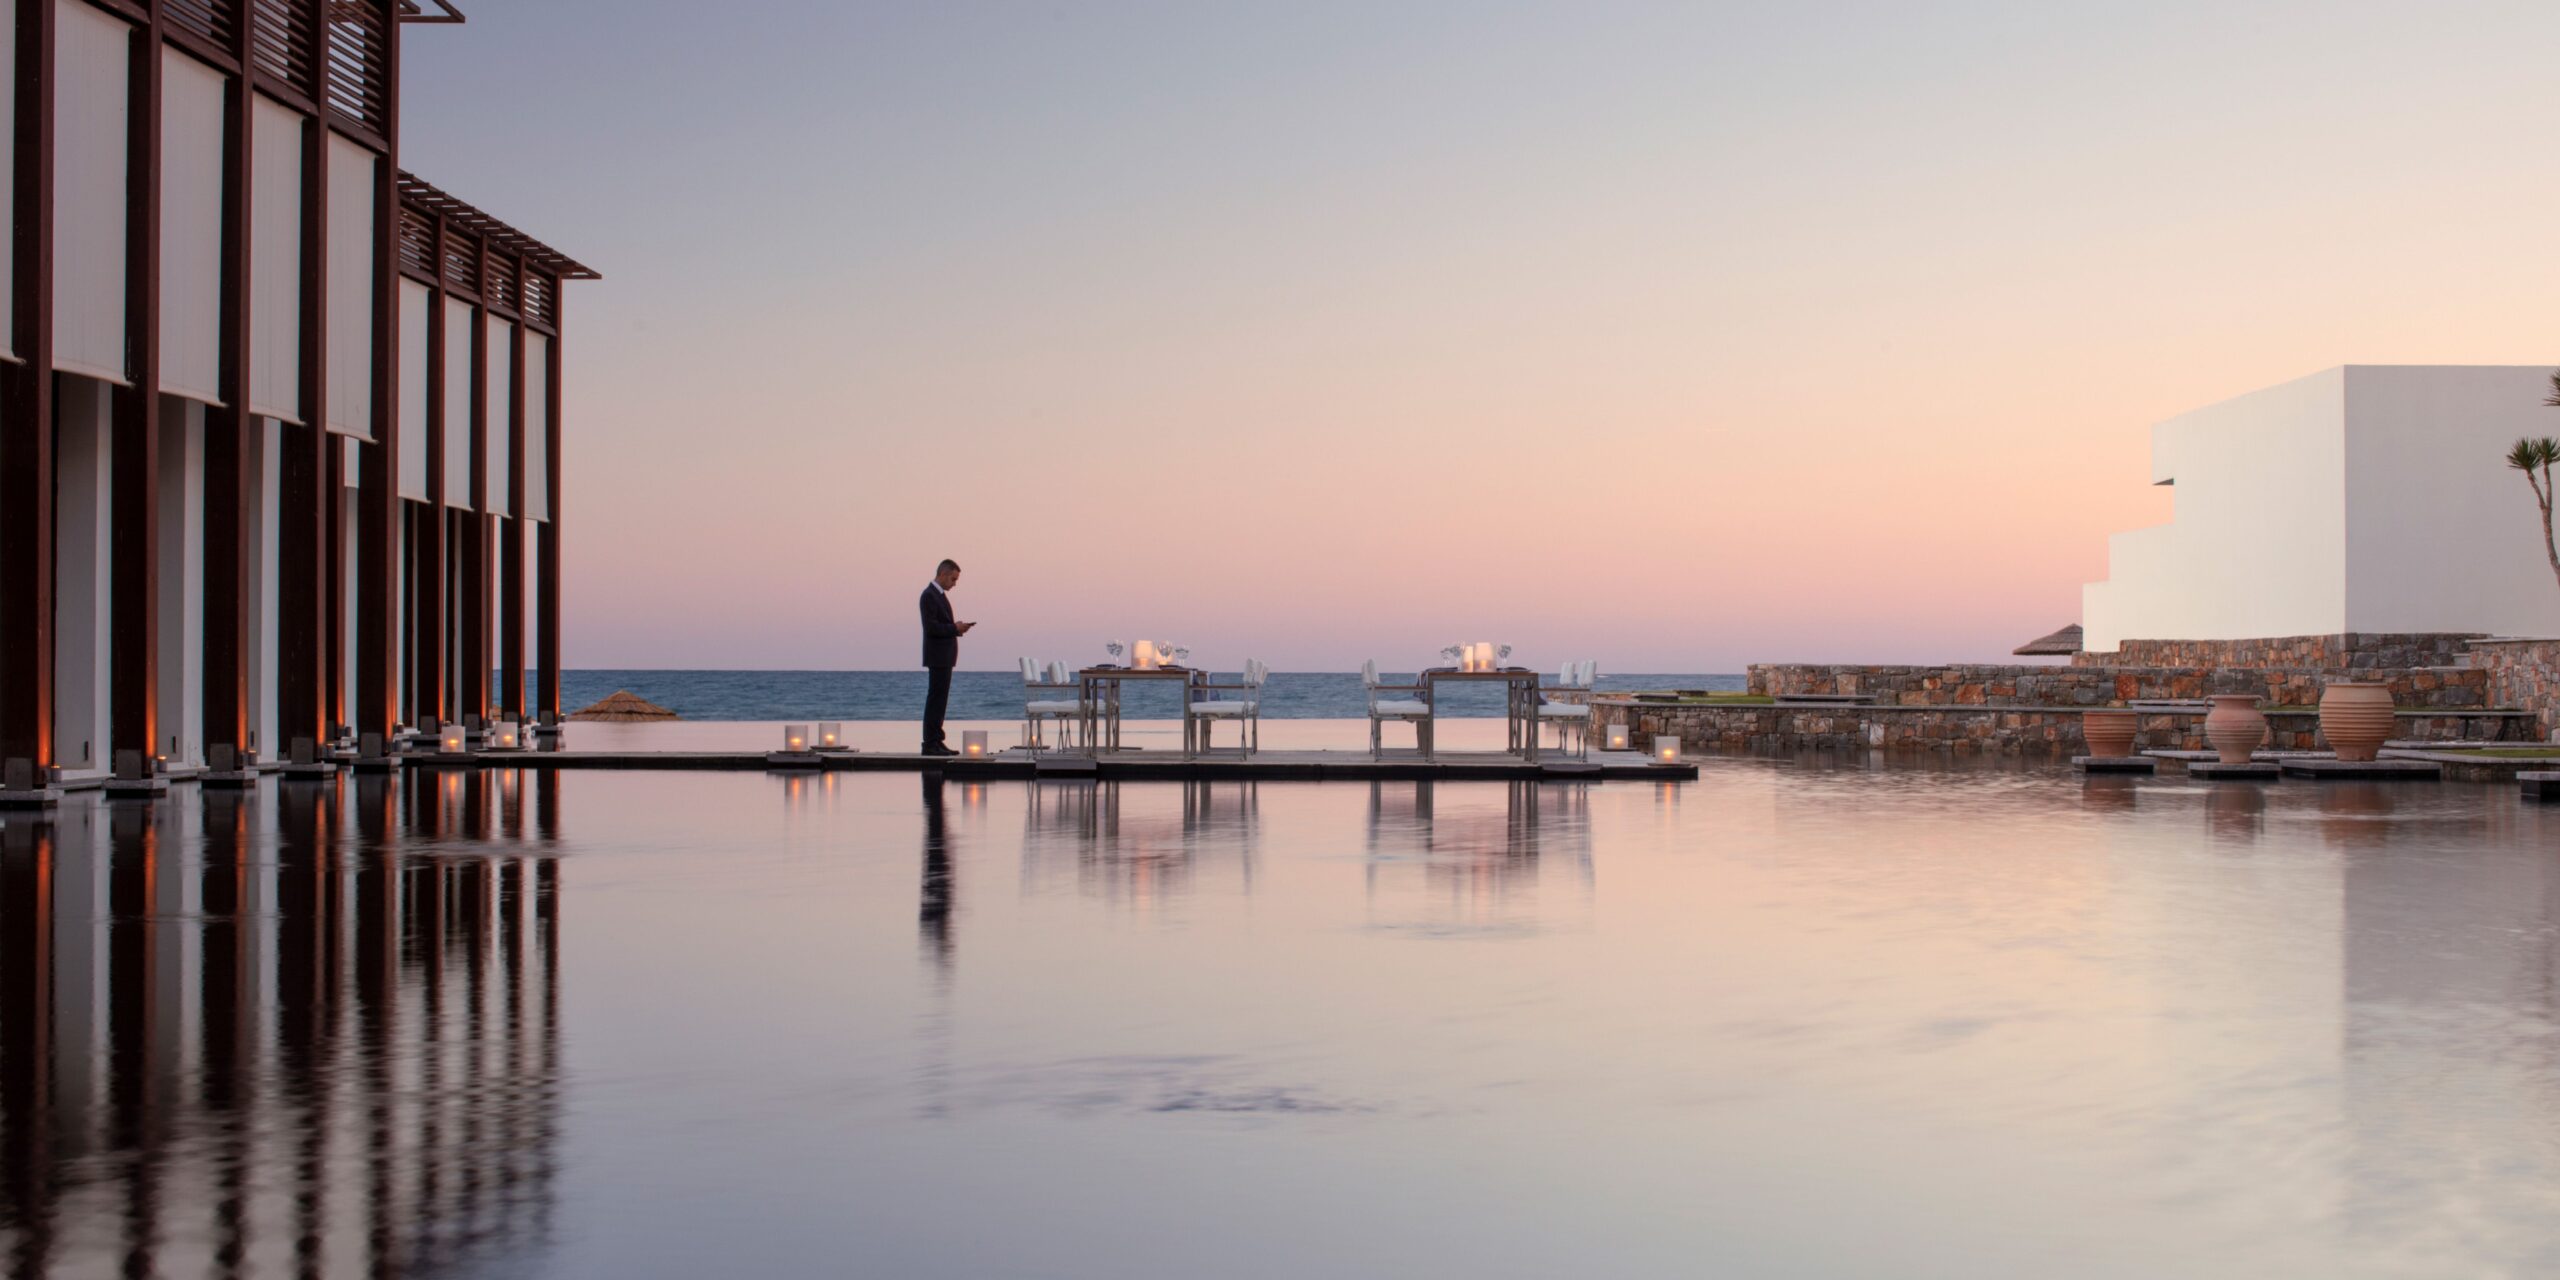 Evening scene at a resort with a reflective pool, dining tables set up, and a person standing by the water's edge, with a view of the ocean and a pastel sky.